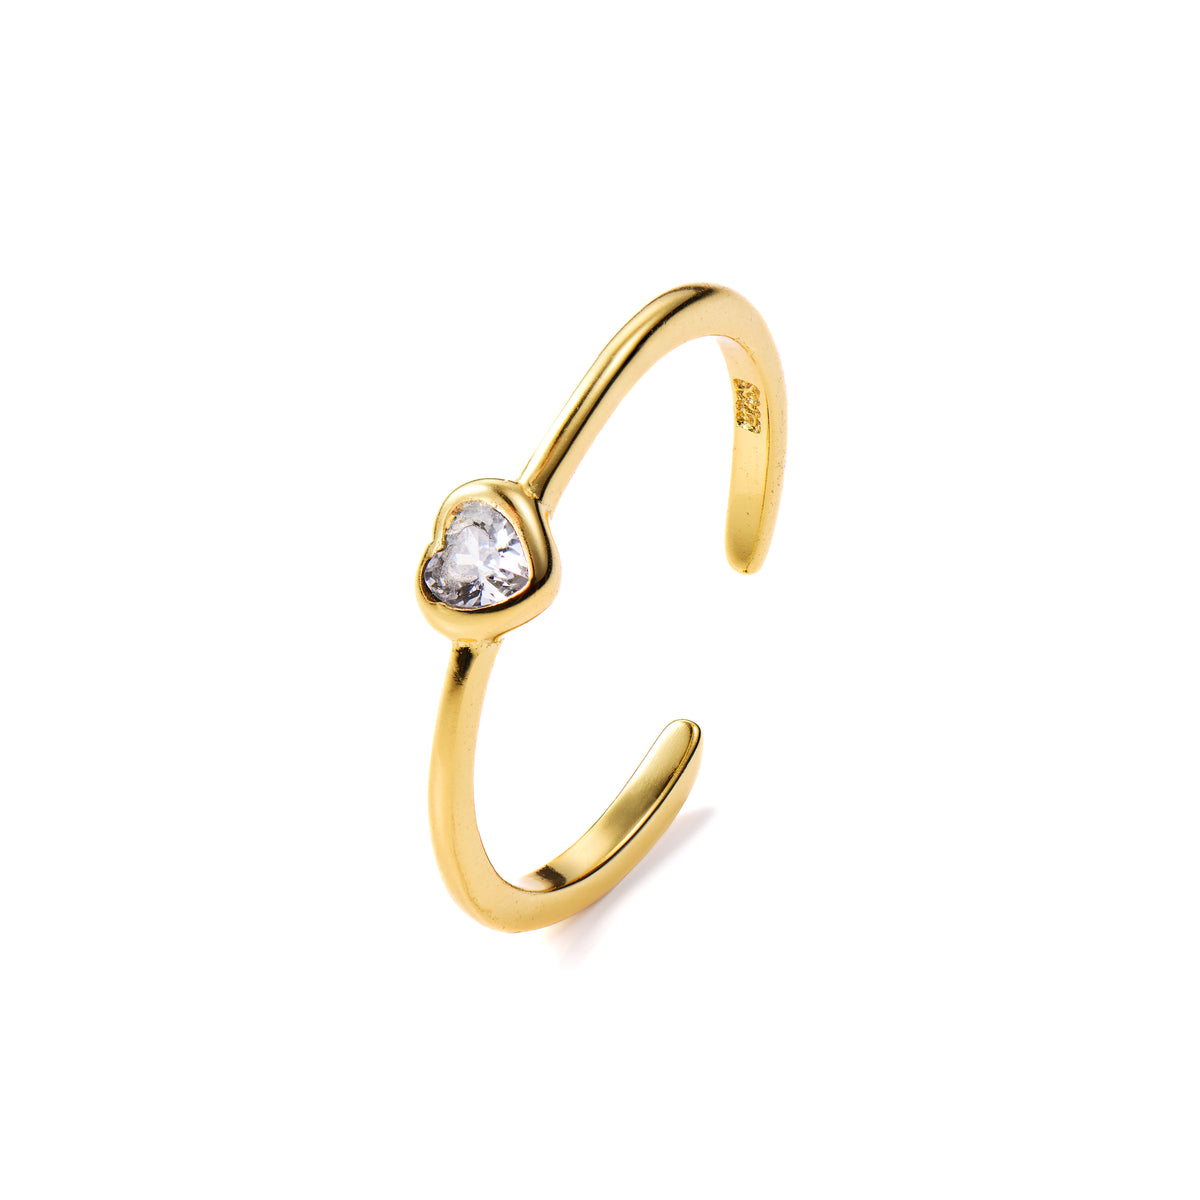 Coeur gold plated Ring, Maison Stephanie